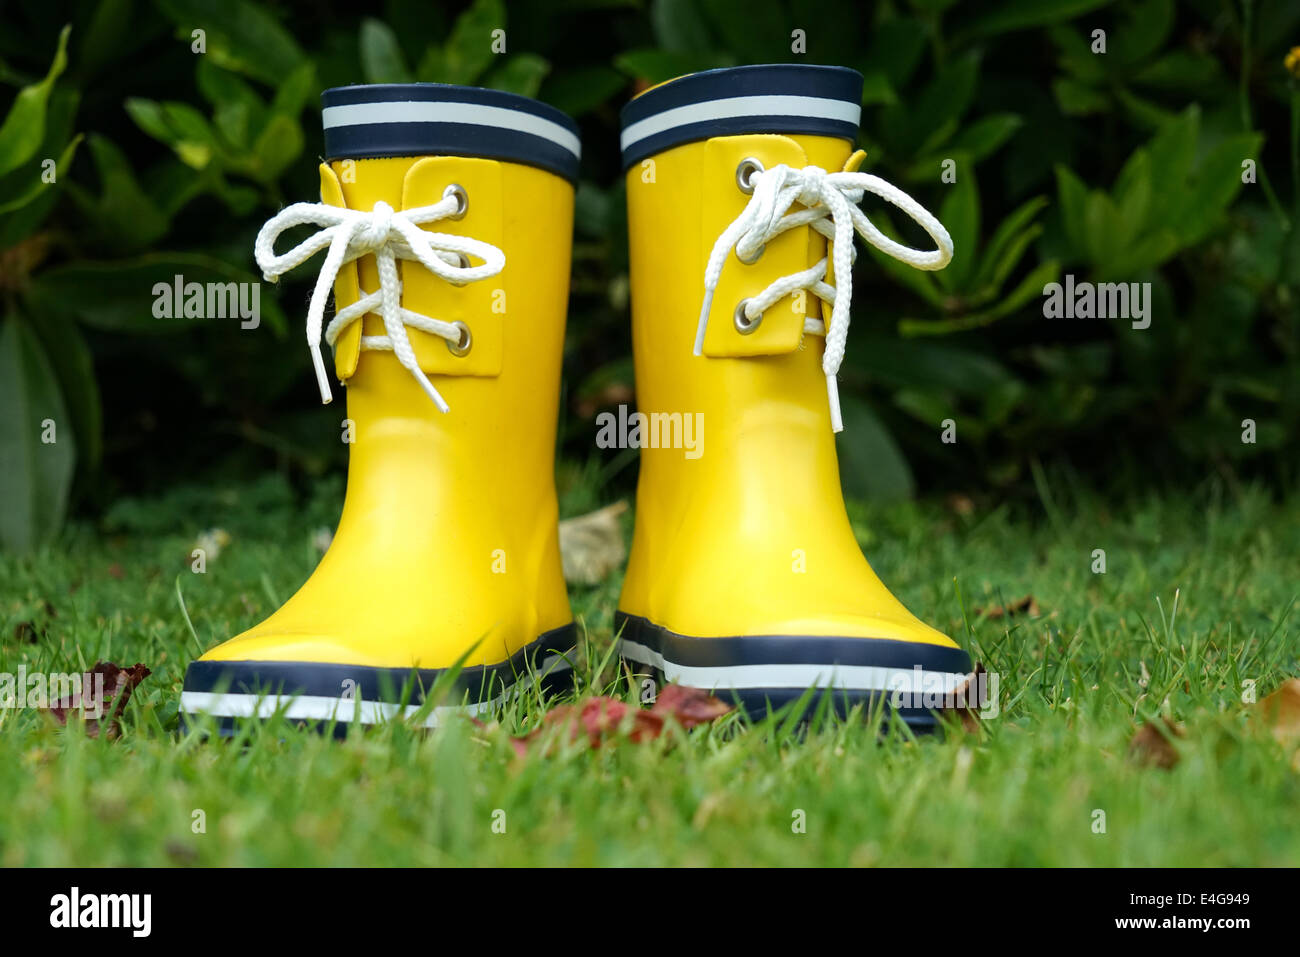 A pair of yellow rubber boots in the garden Stock Photo